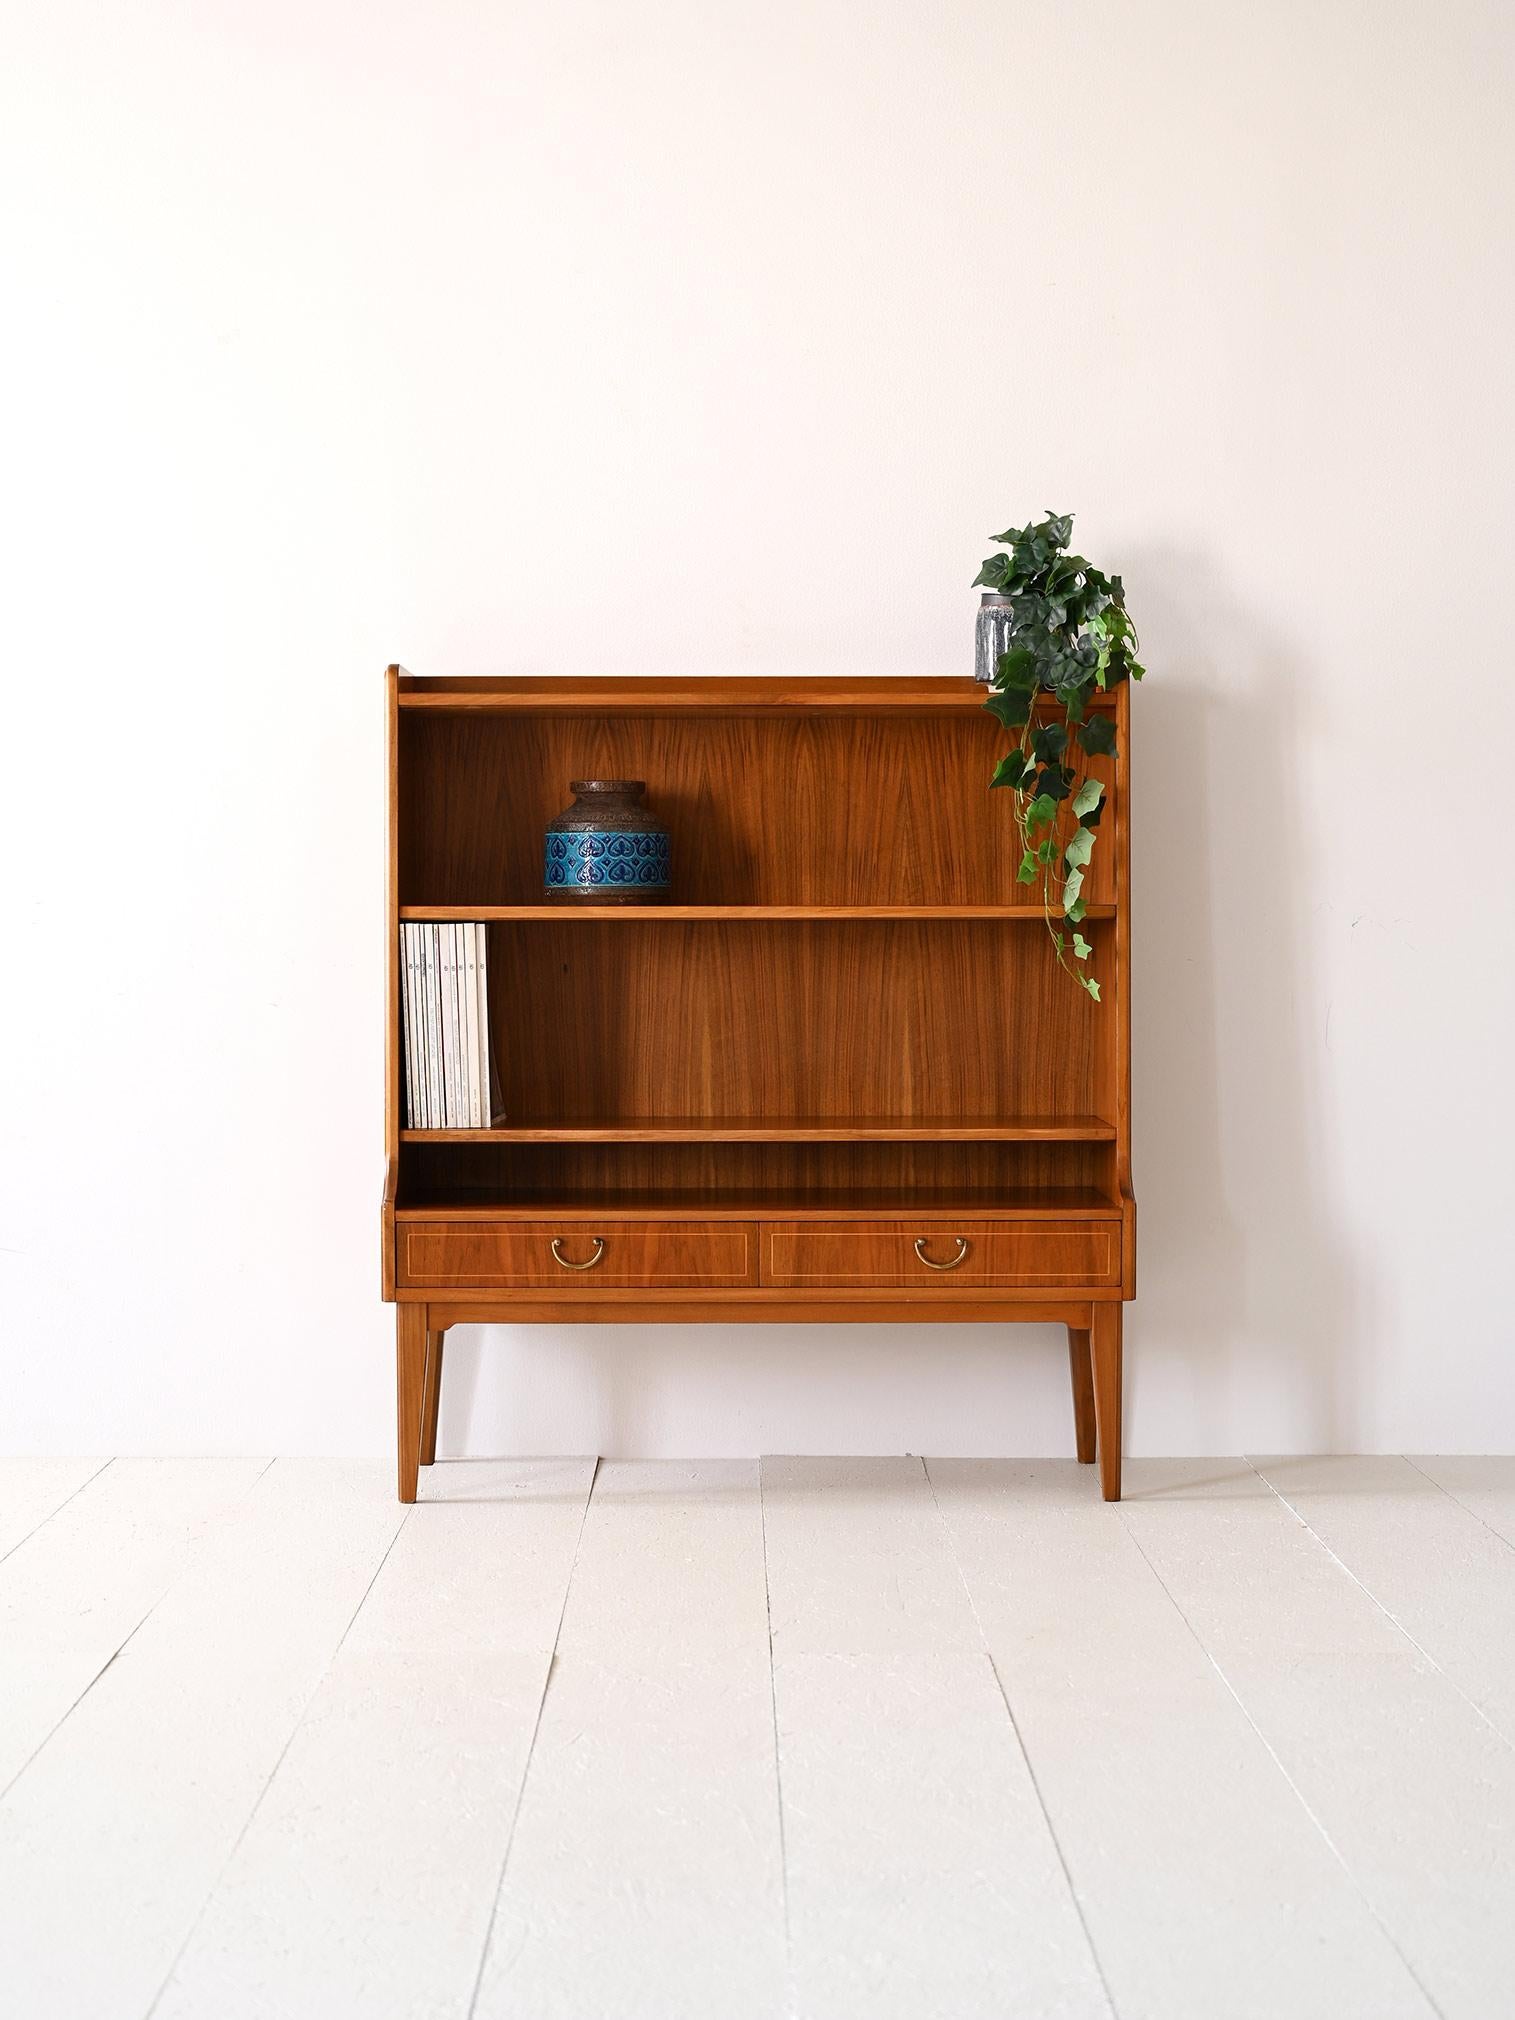 Vintage 1960s cabinet with shelving and drawers.

This particular piece of Nordic-made furniture is distinguished by its height of 112 cm, which also makes it ideal for use in the entryway, hallway or bedroom.
It consists of three shelves and two